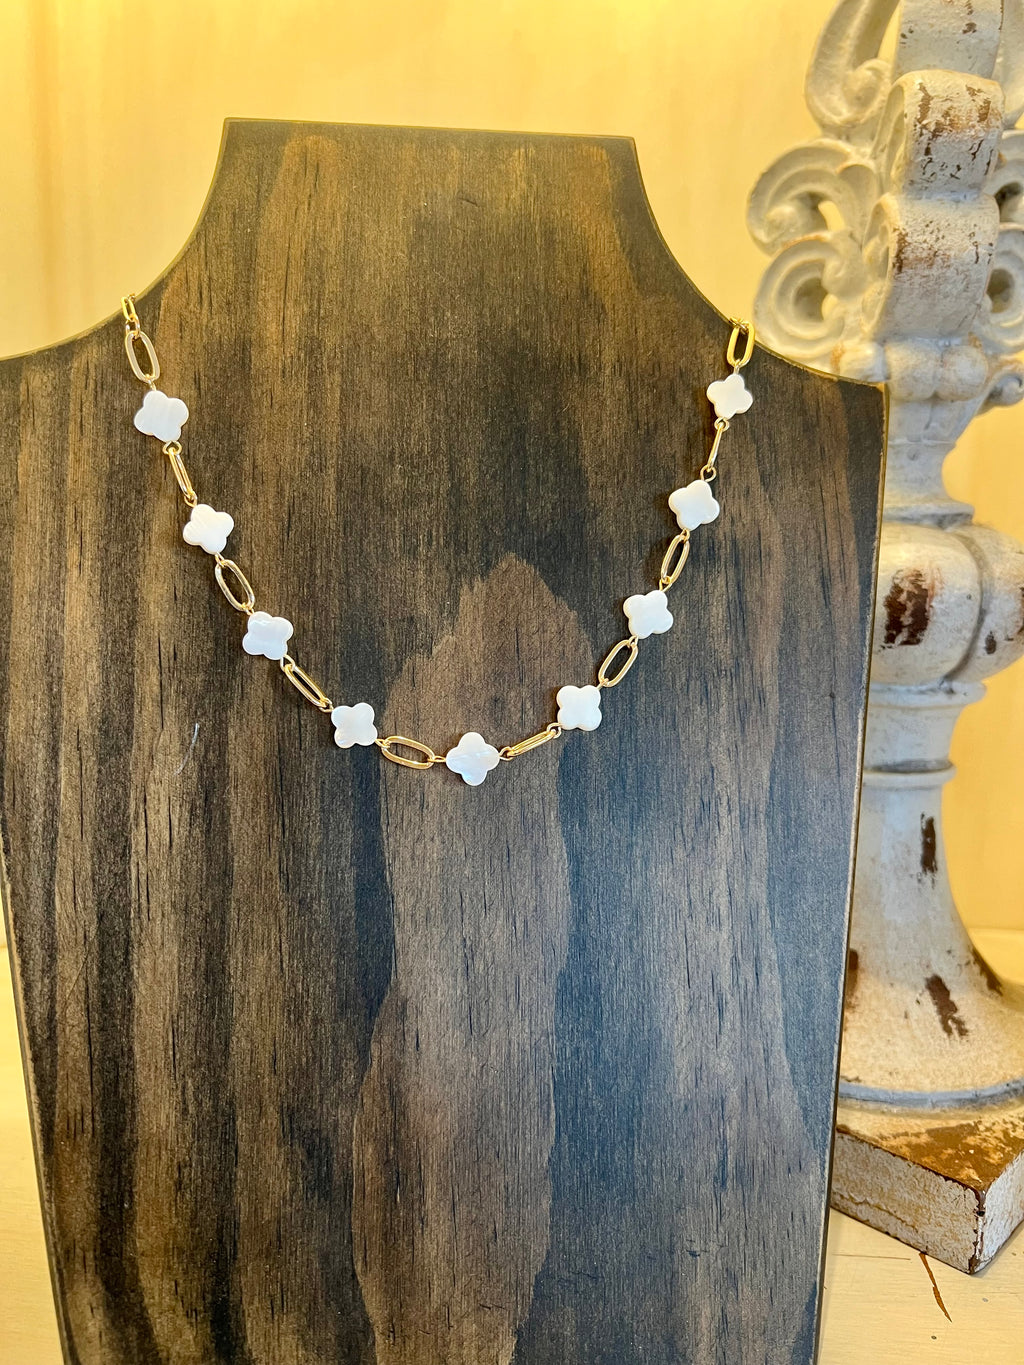 Chain Link Necklace With Mother of Pearl Clover Stations